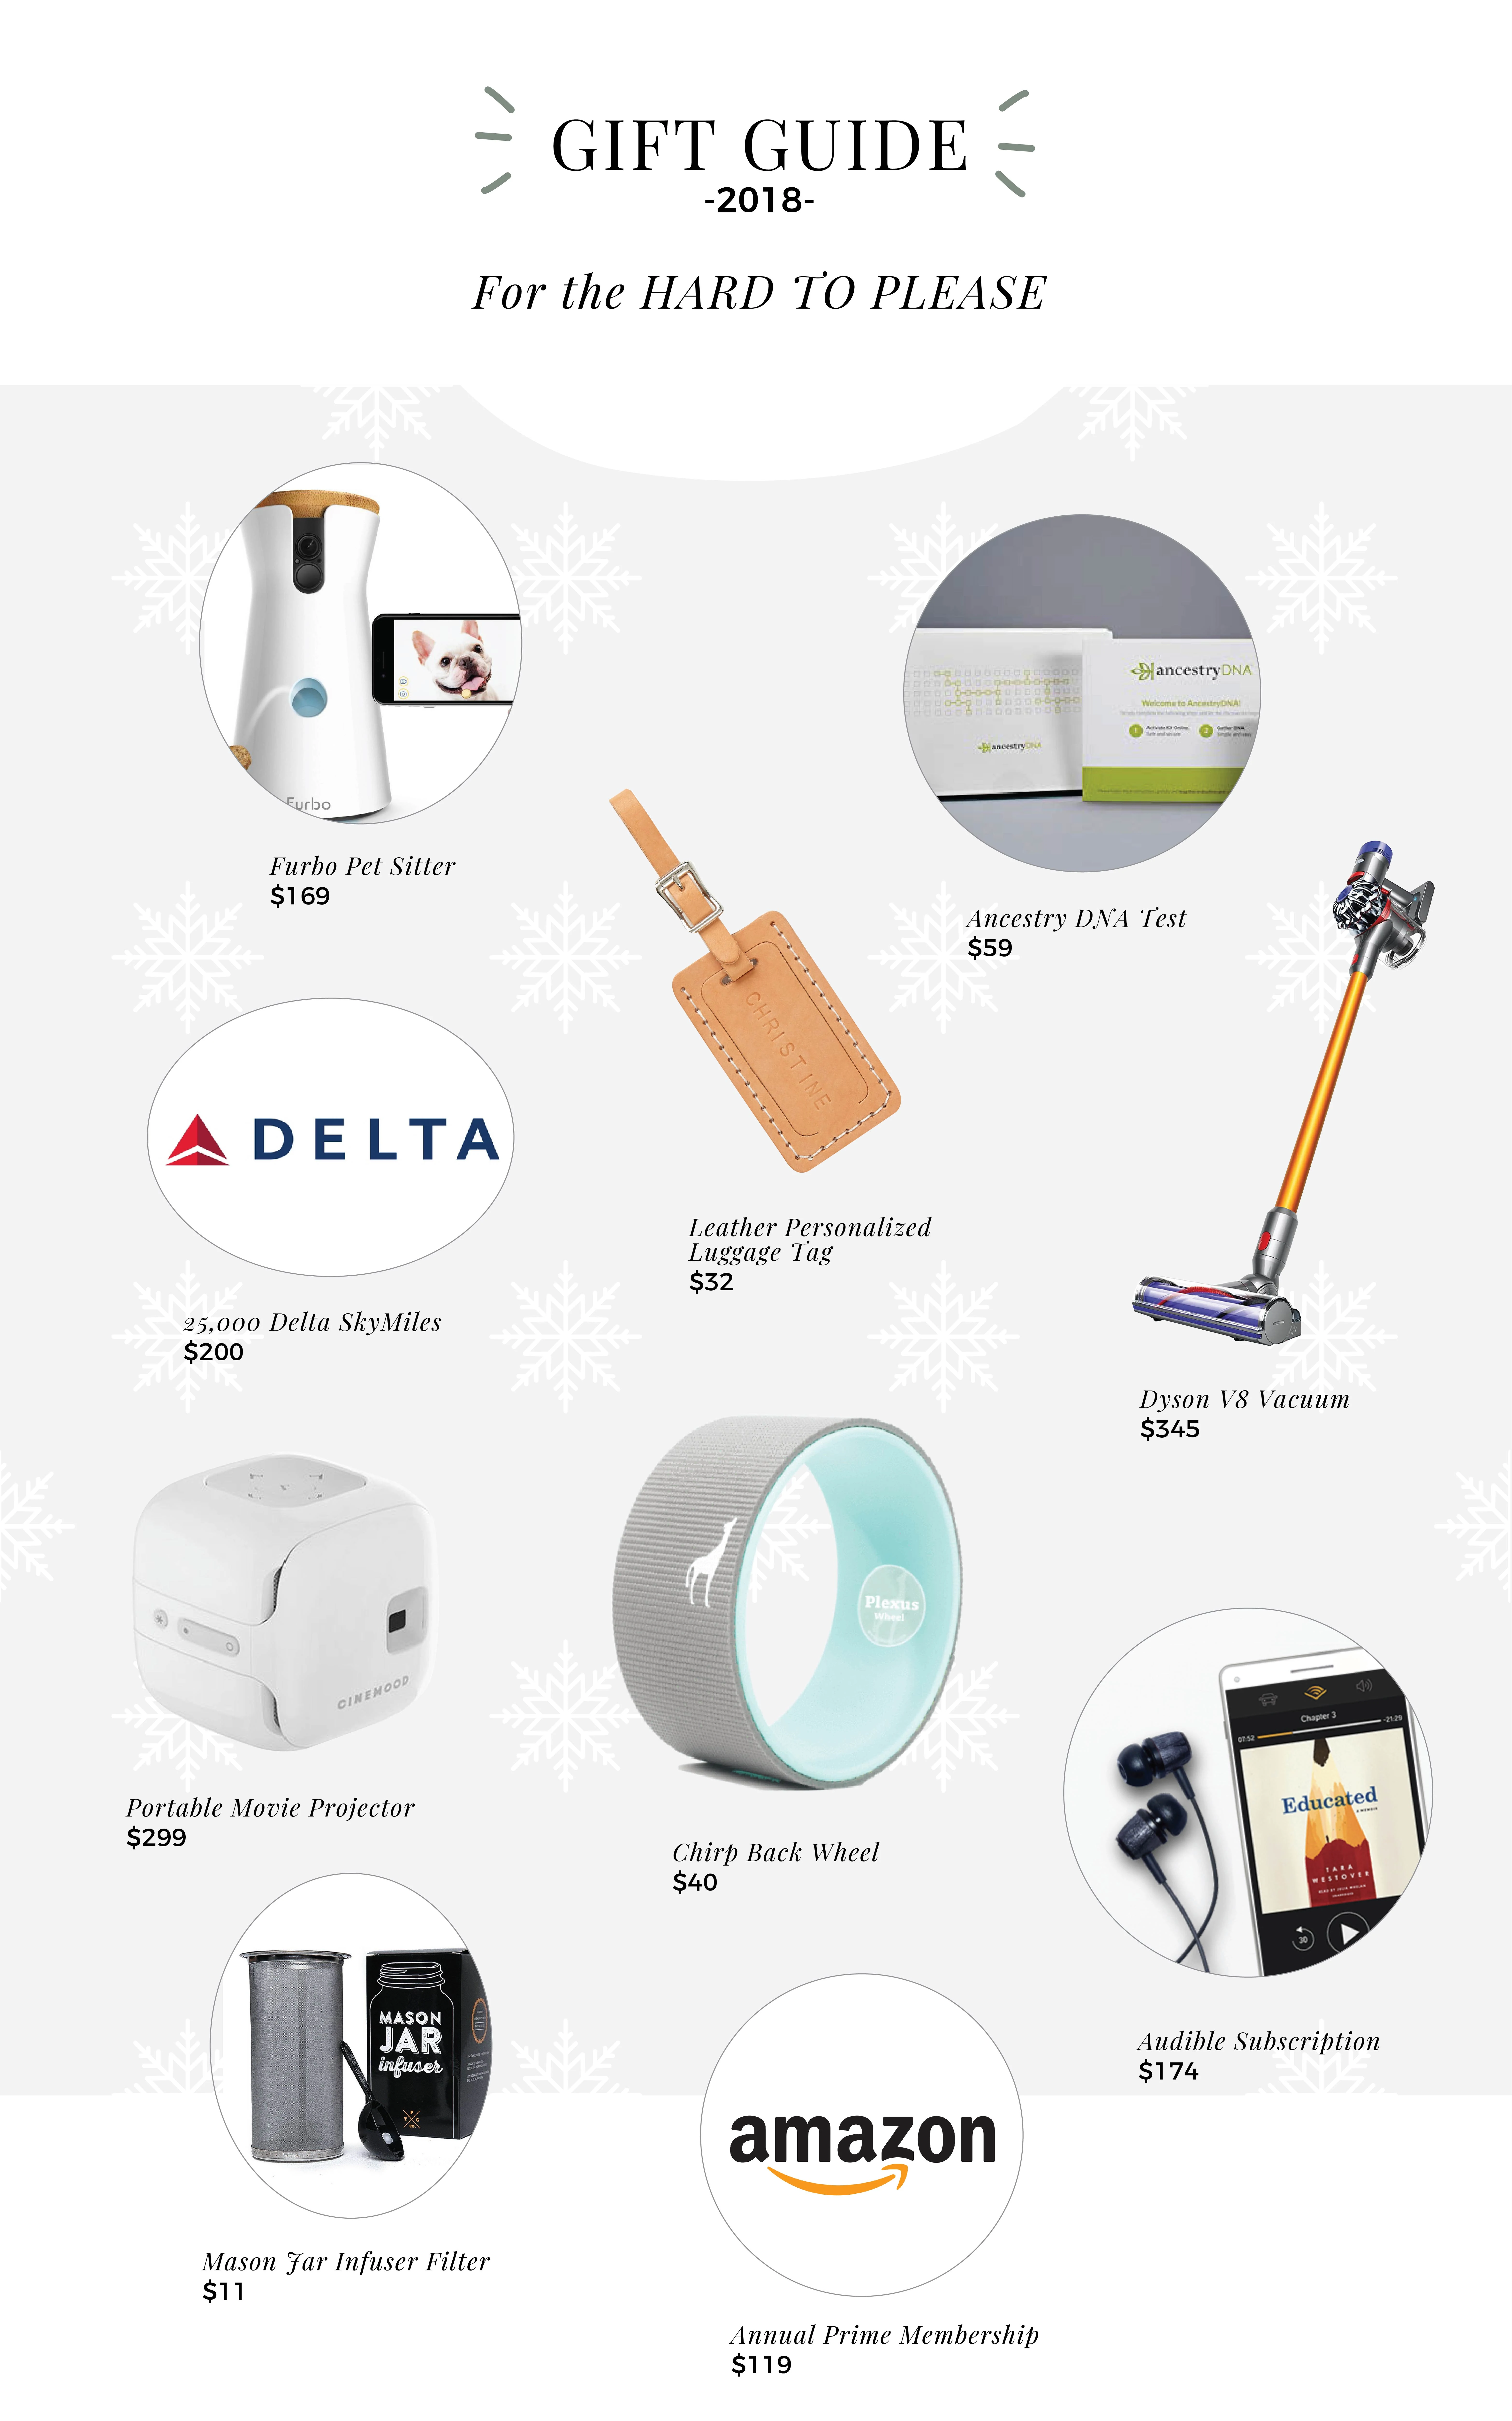 The 2018 Holiday Gift Guide: For the Hard to Please is for the person in your life who you just have NO idea what to get them! 